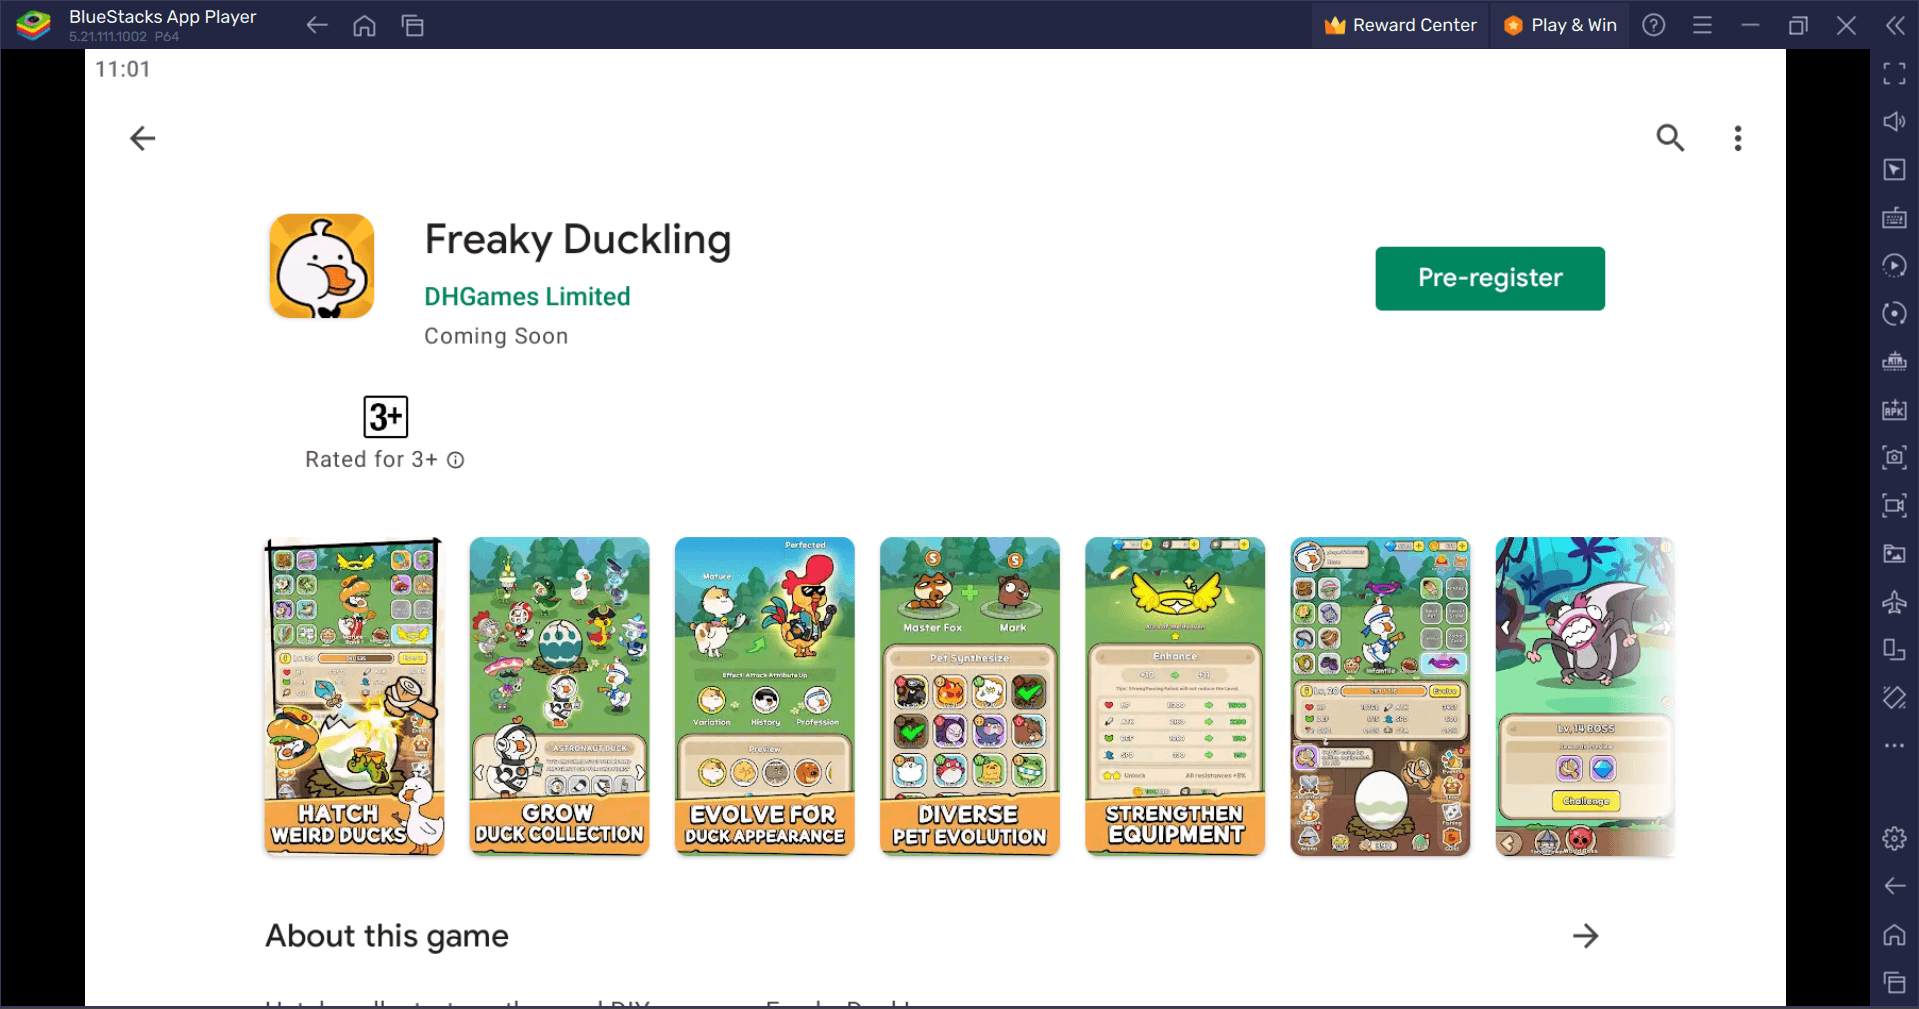 How to Play Freaky Duckling on PC with BlueStacks